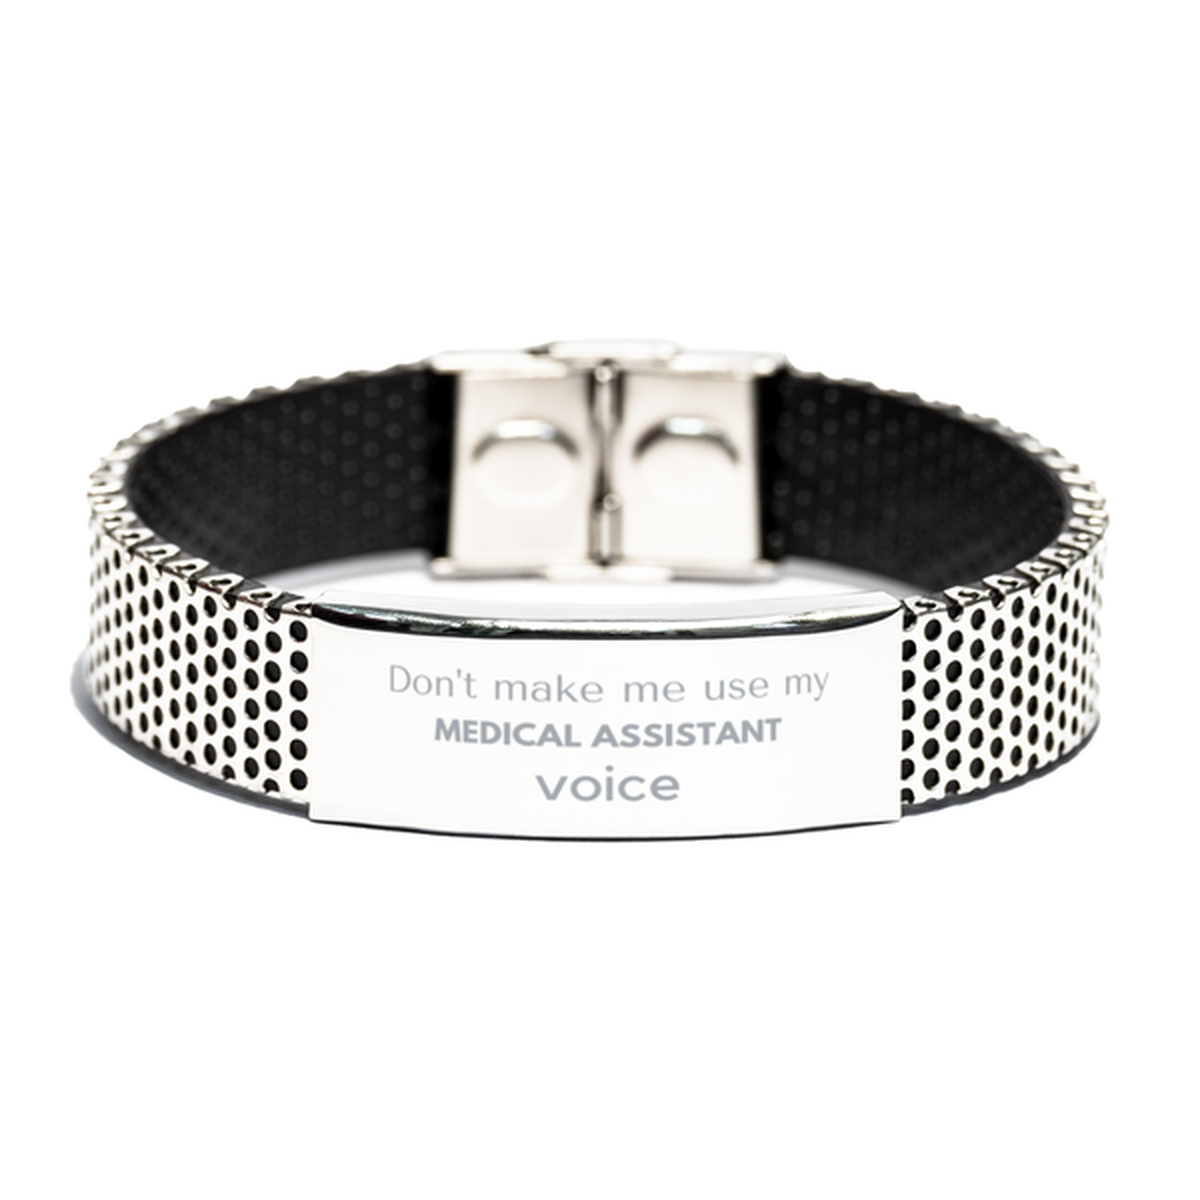 Don't make me use my Medical Assistant voice, Sarcasm Medical Assistant Gifts, Christmas Medical Assistant Stainless Steel Bracelet Birthday Unique Gifts For Medical Assistant Coworkers, Men, Women, Colleague, Friends